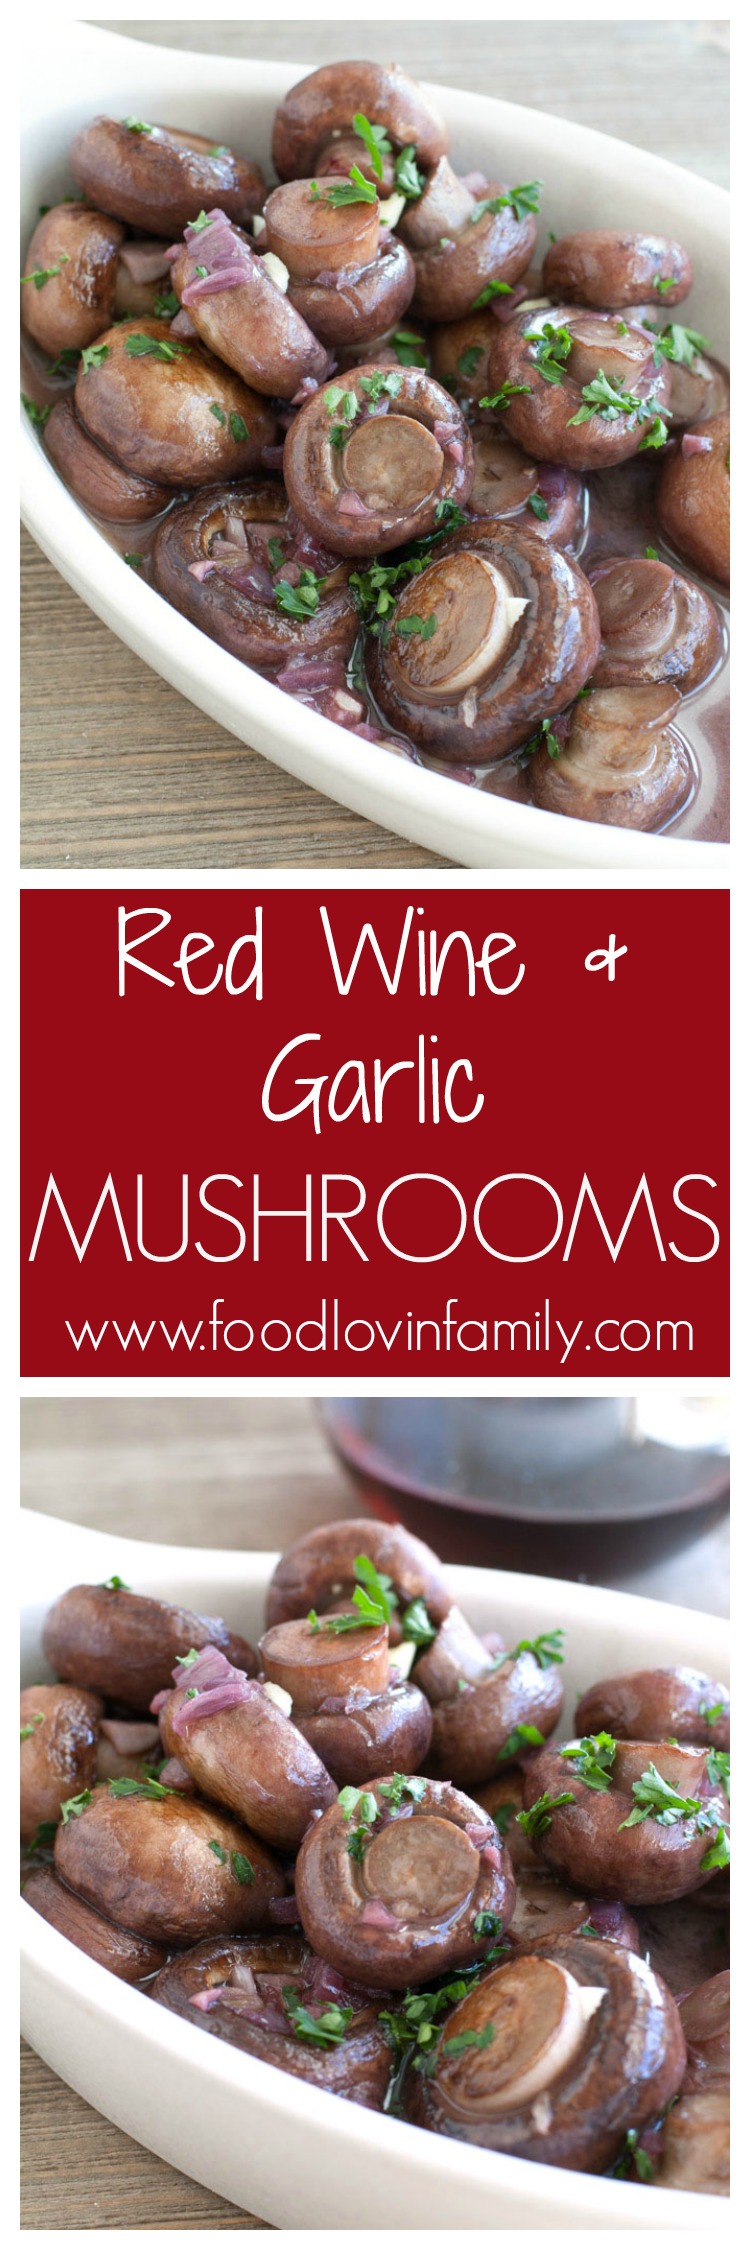 Red wine and garlic mushrooms is a simple and elegant side dish. Mushrooms cooked in butter, red wine, garlic and shallots.